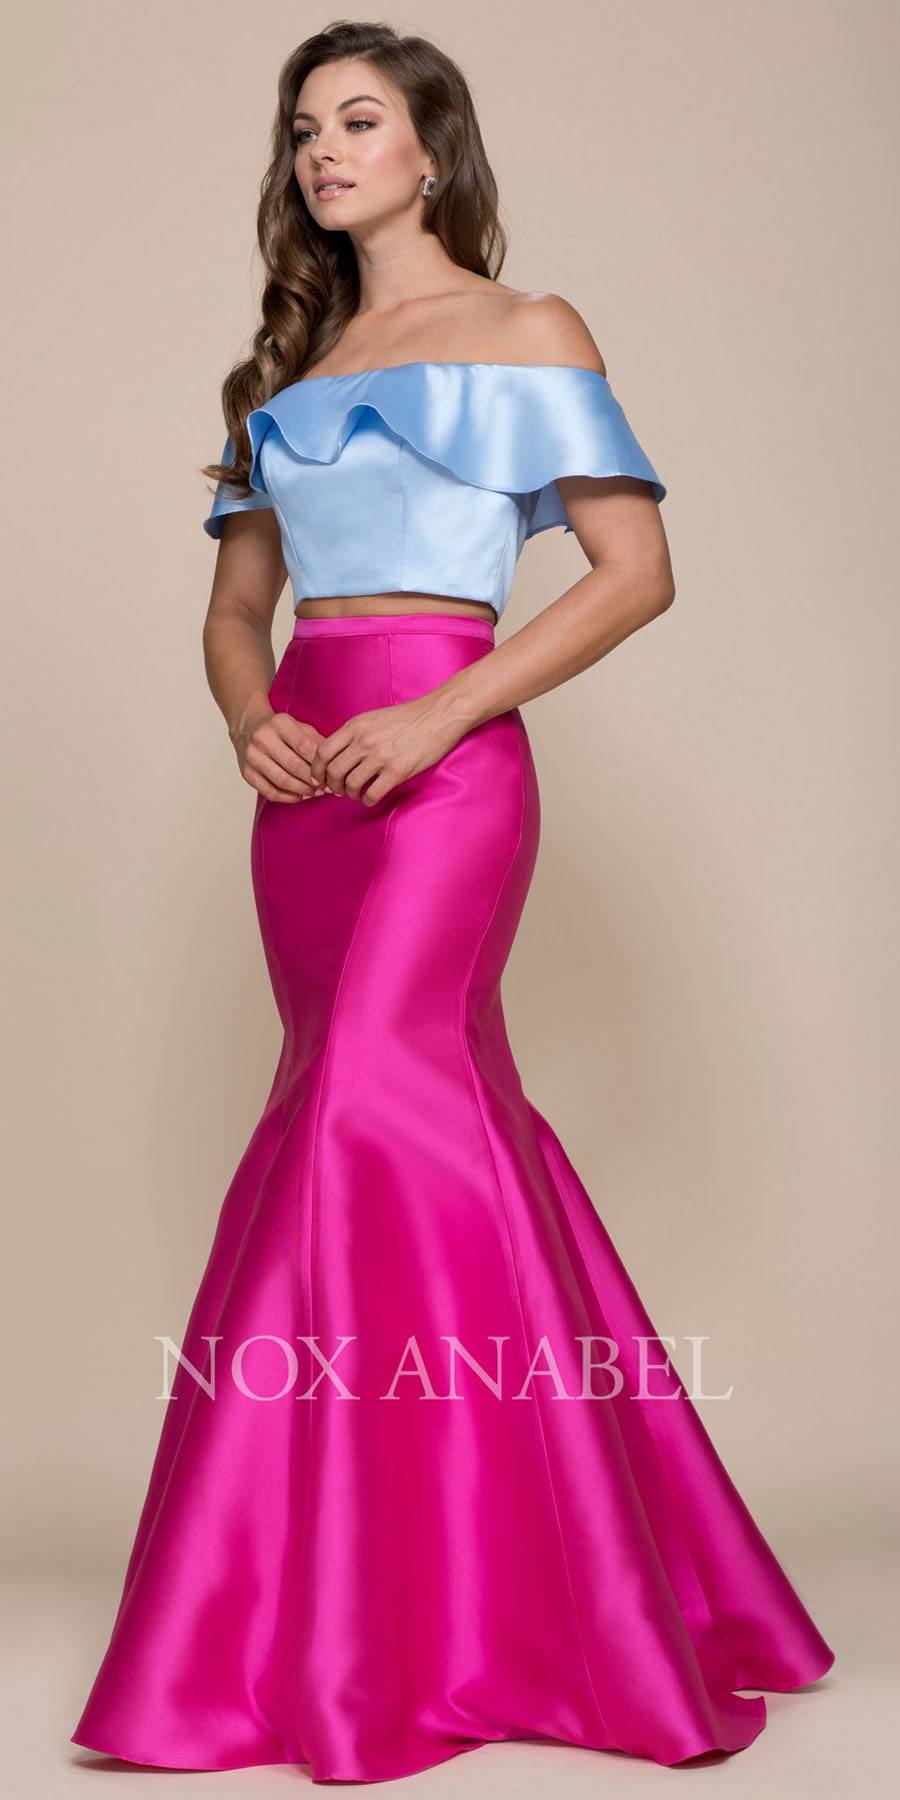 Fuchsia-Blue Off Shoulder Mermaid Two-Piece Prom Gown